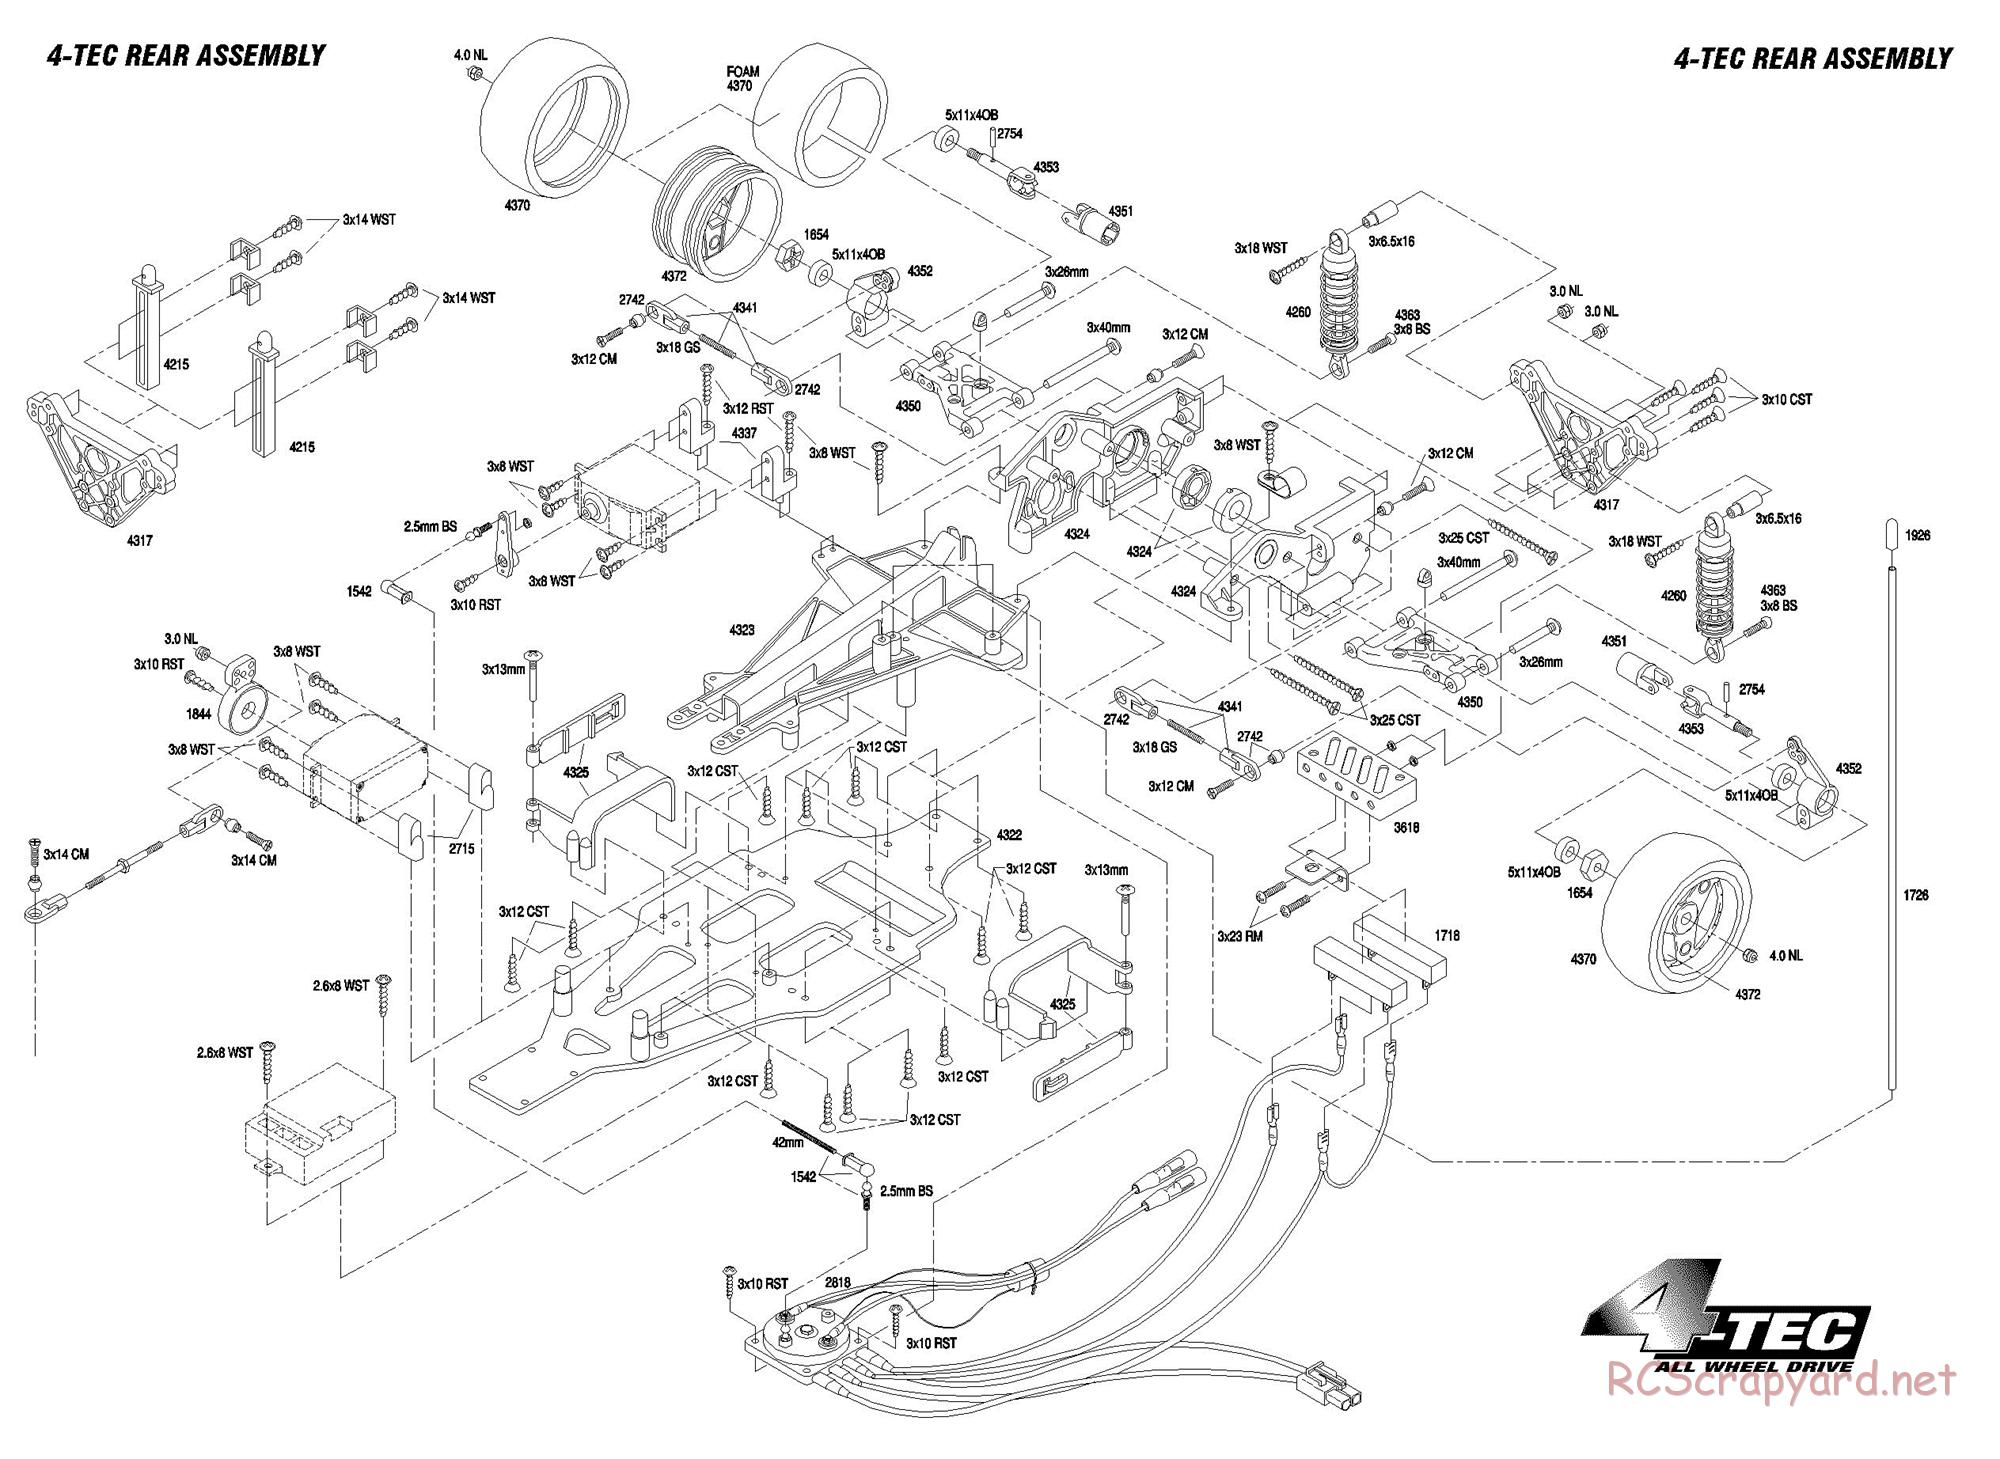 Traxxas - 4-Tec (1998) - Exploded Views - Page 2